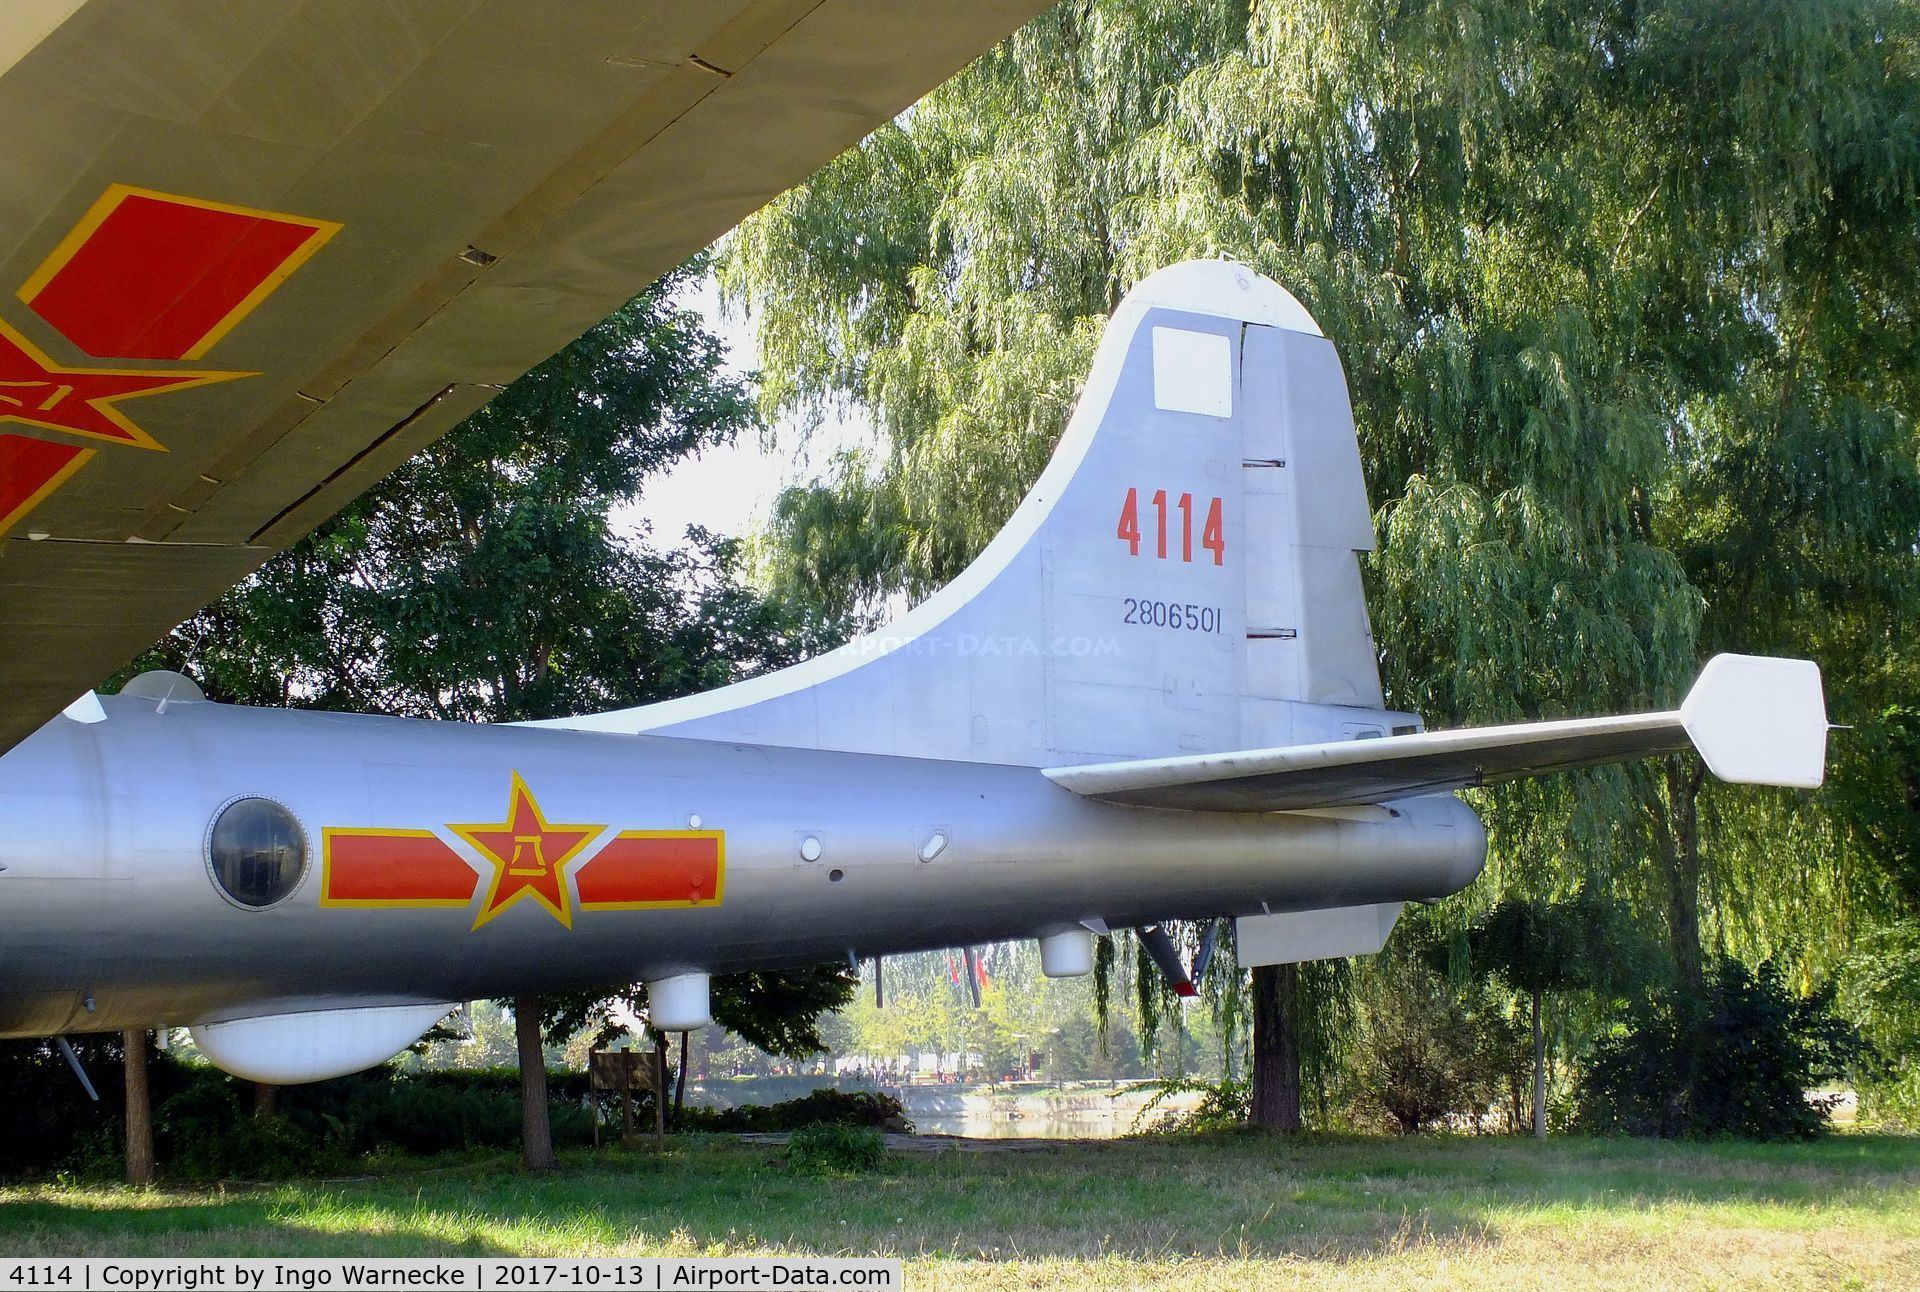 4114, Tupolev Tu-4 C/N 2806501, Tupolev Tu-4 BULL (re-engined with WJ-6 turboprops) as an experimental AWACS-testbed at the China Aviation Museum Datangshan